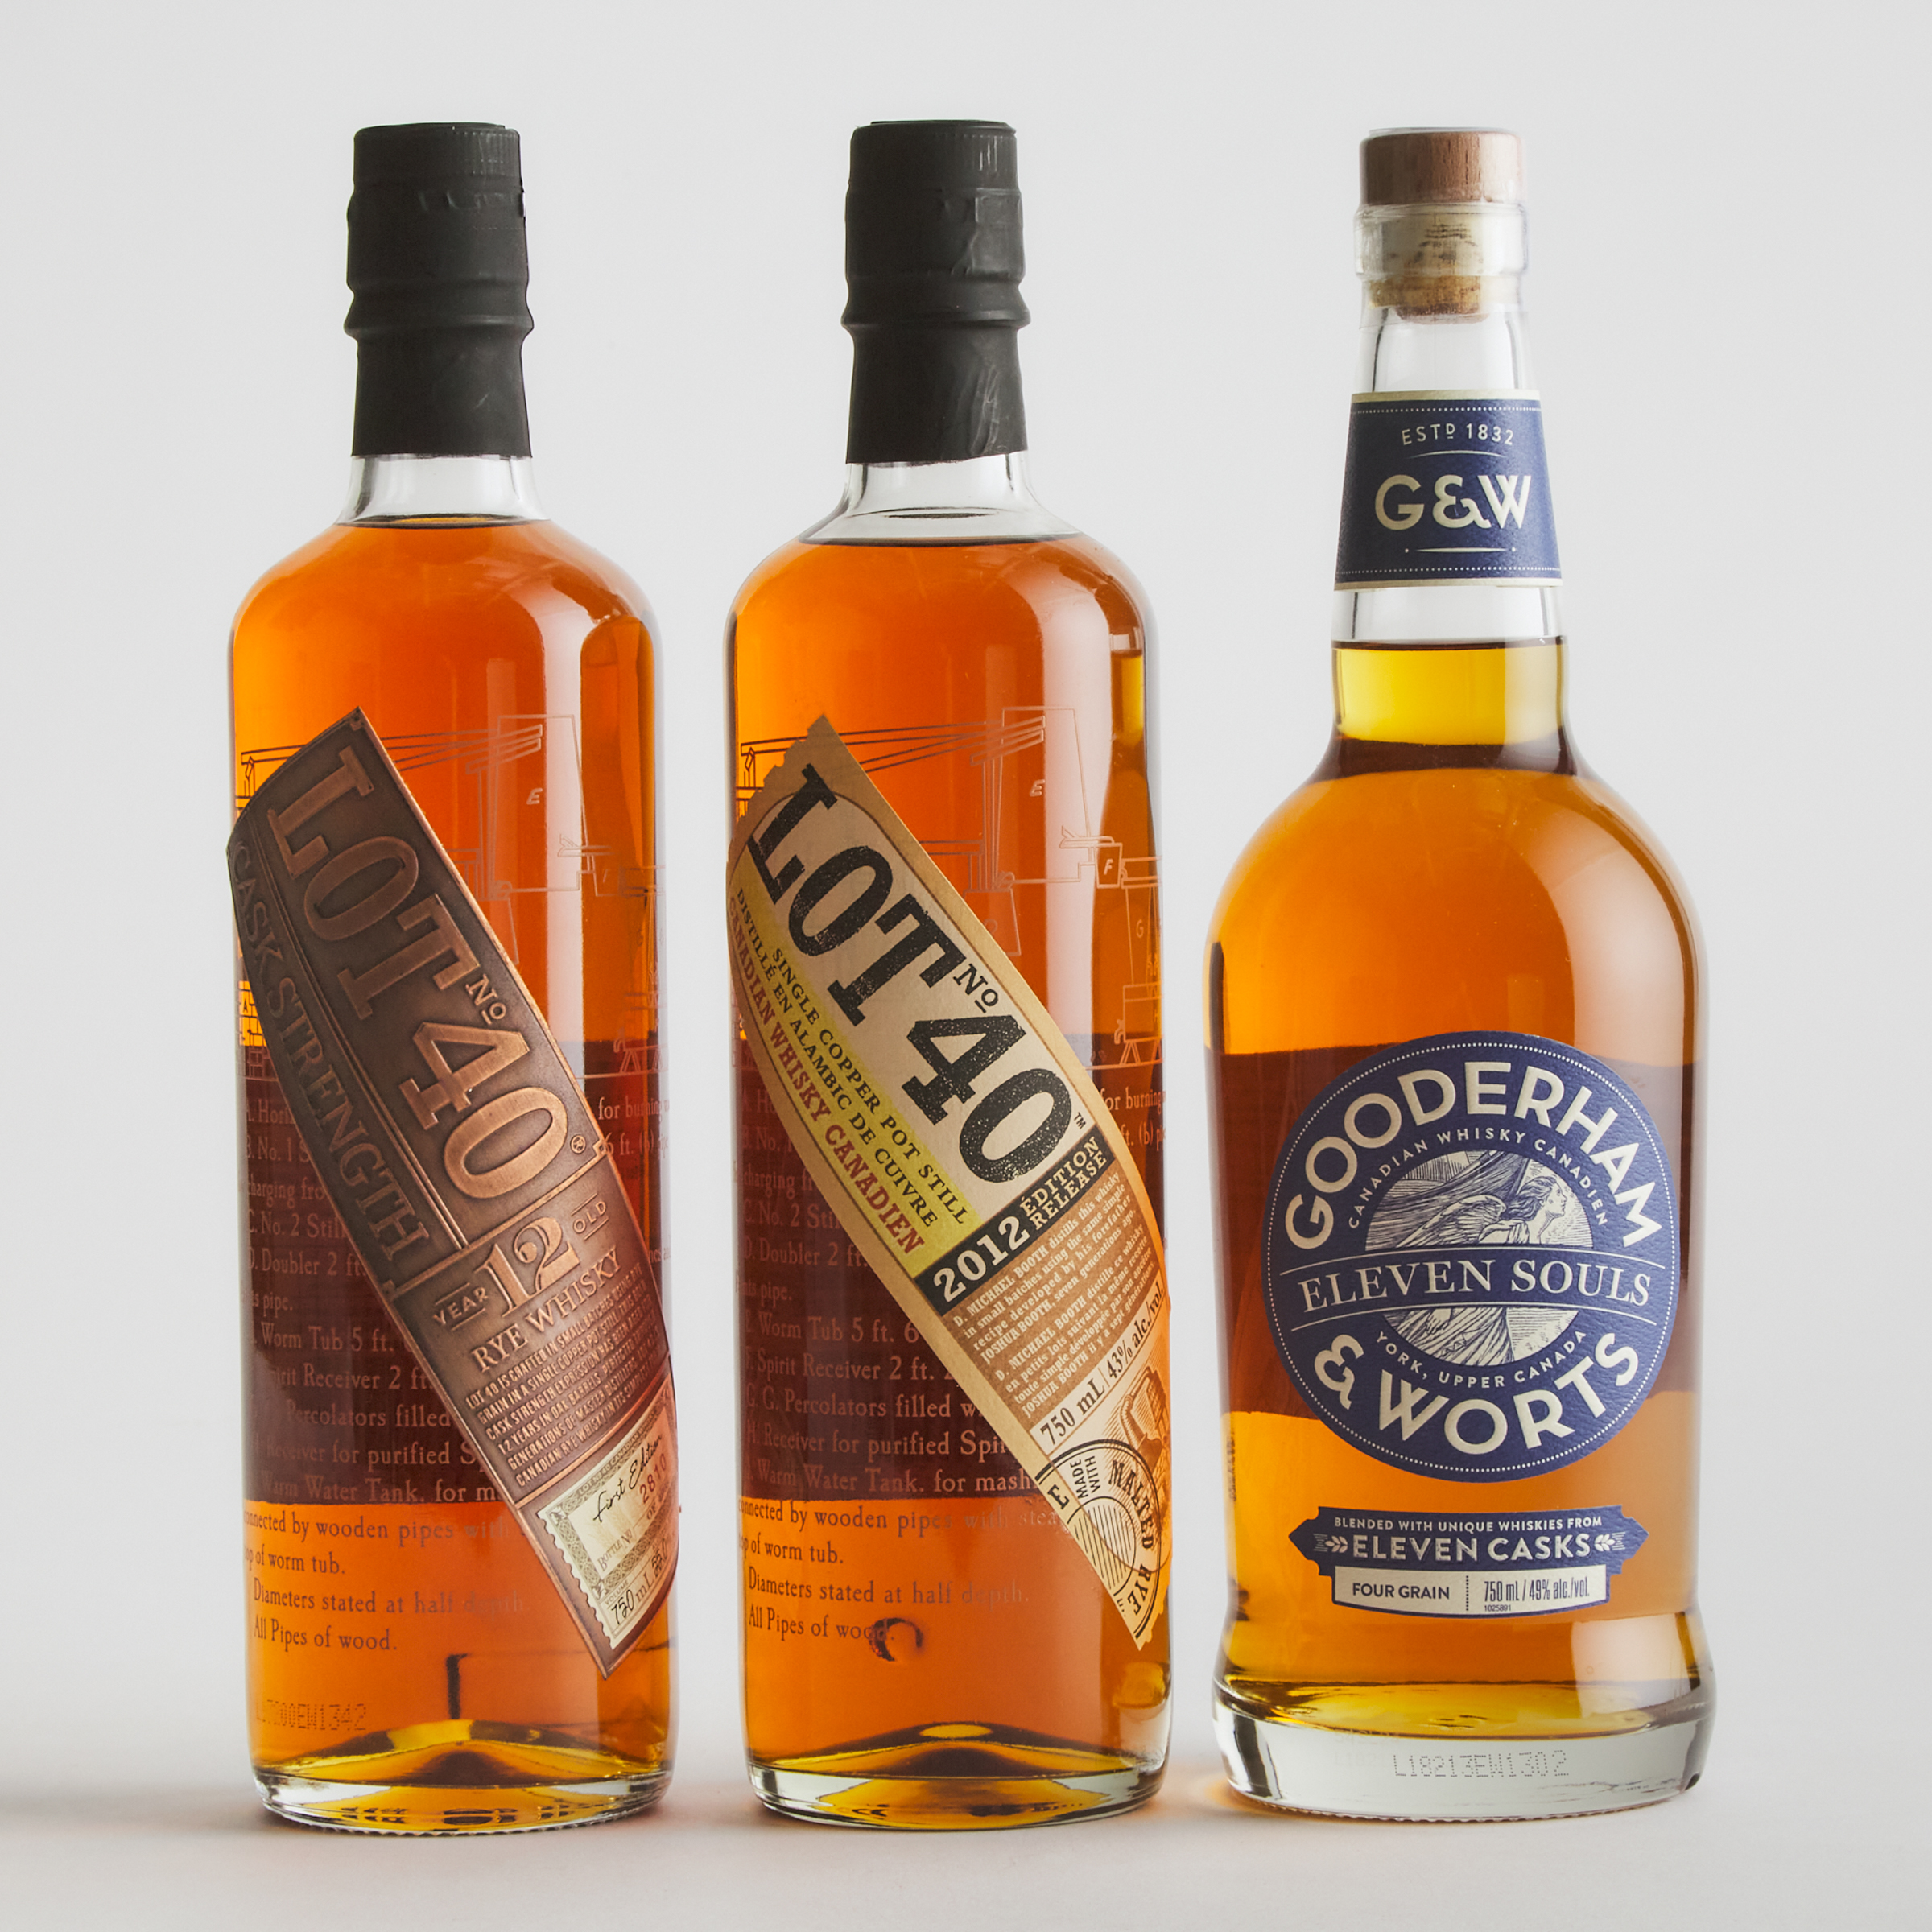 GOODERHAM AND WORTS CANADIAN WHISKY NAS (ONE 750 ML)
LOT 40 CASK STRENGTH RYE WHISKY 12 YEARS (ONE 750 ML)
LOT 40 SINGLE COPPER POT STILL CANADIAN WHISKY (ONE 750 ML)